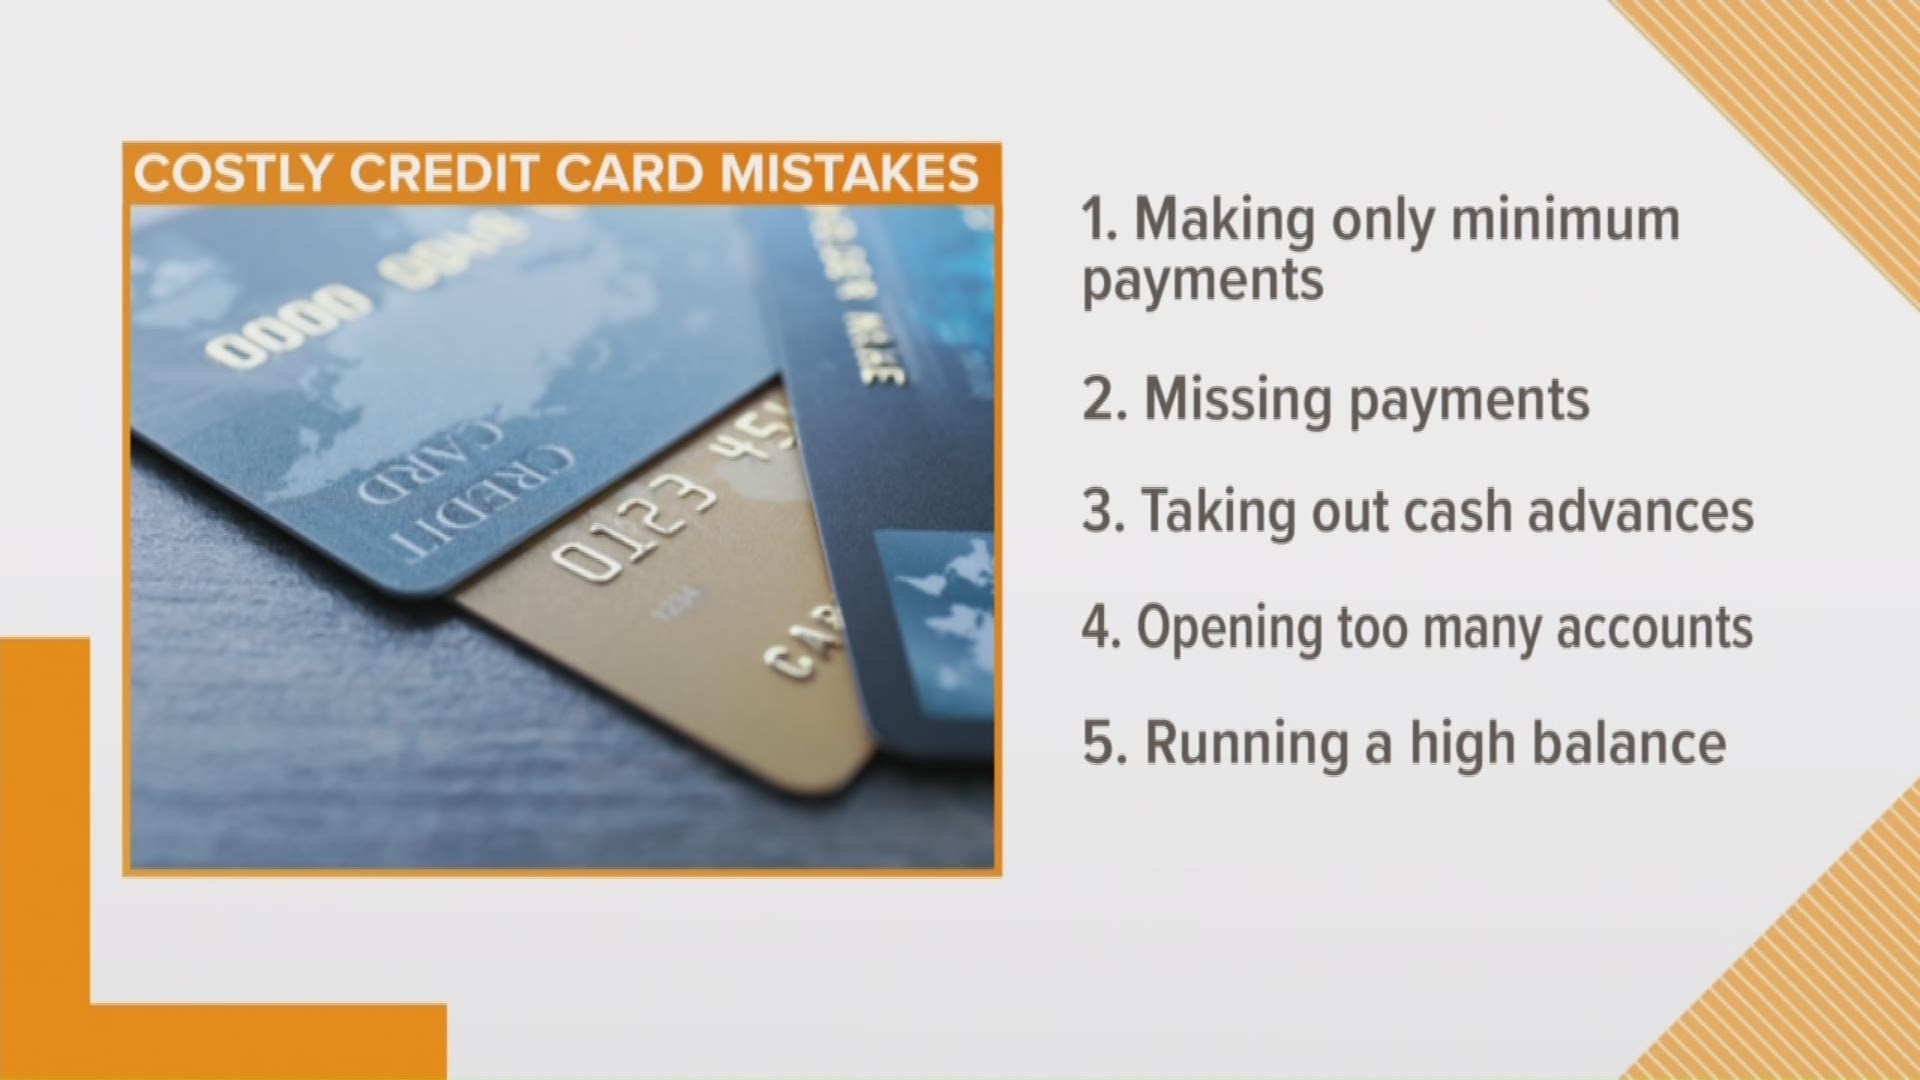 Tips for keeping your credit card debt in check.